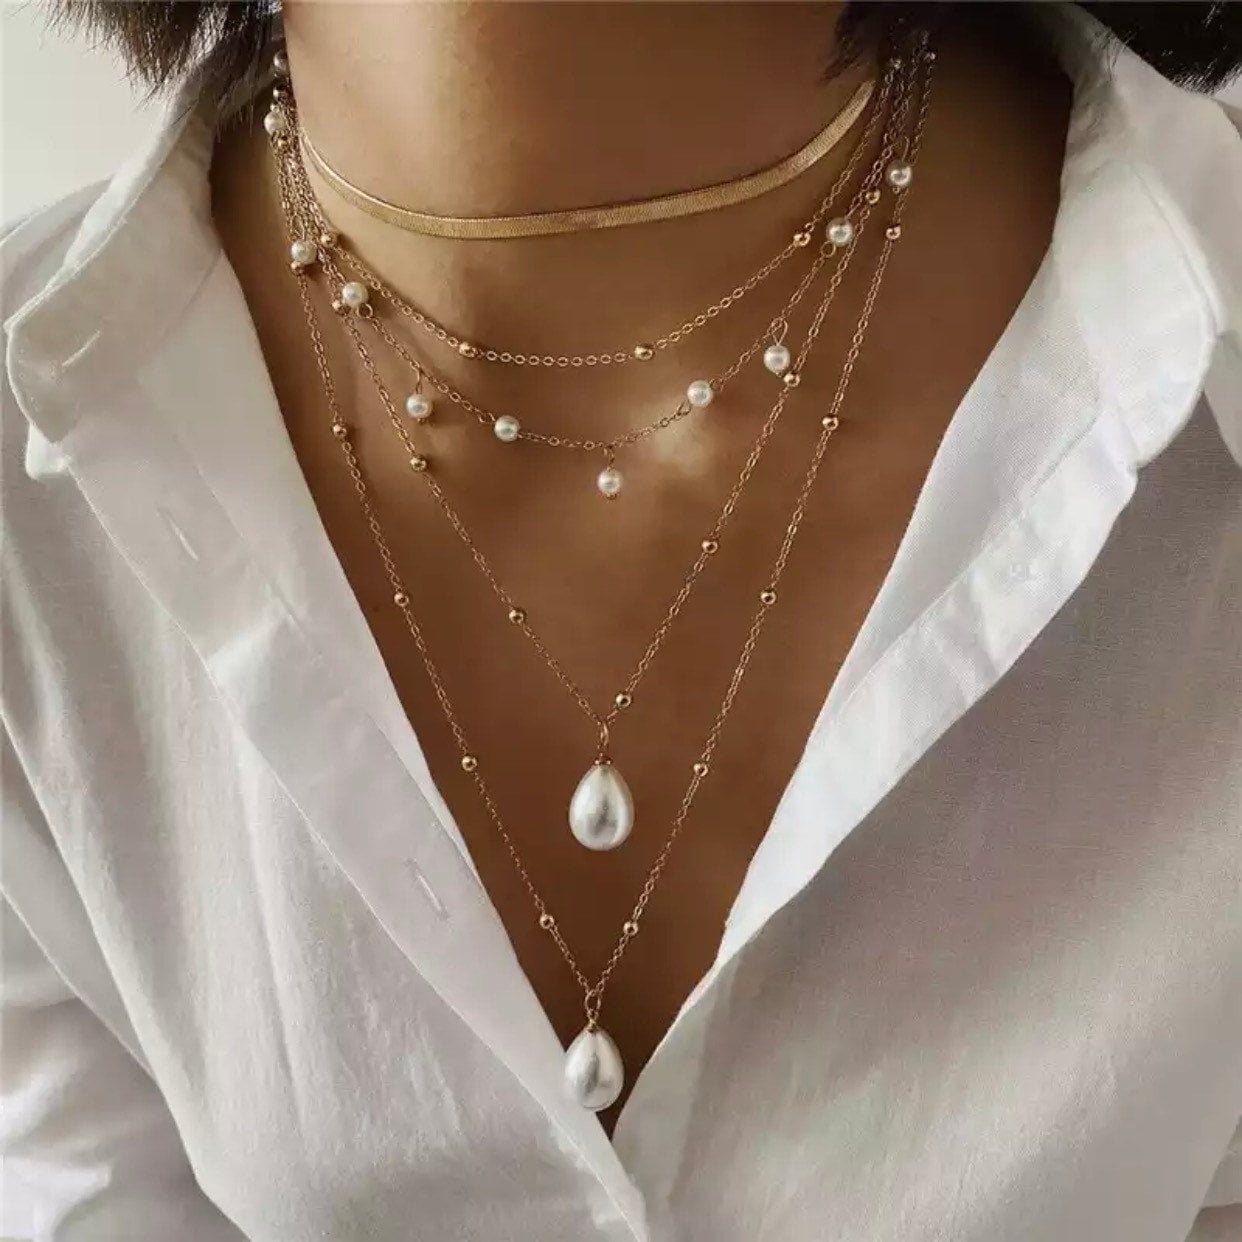 Layered Necklace Set Layered Necklace Gold / Silver Layered Necklaces for  Women Triple Layered Necklace Multi Strand Necklace 